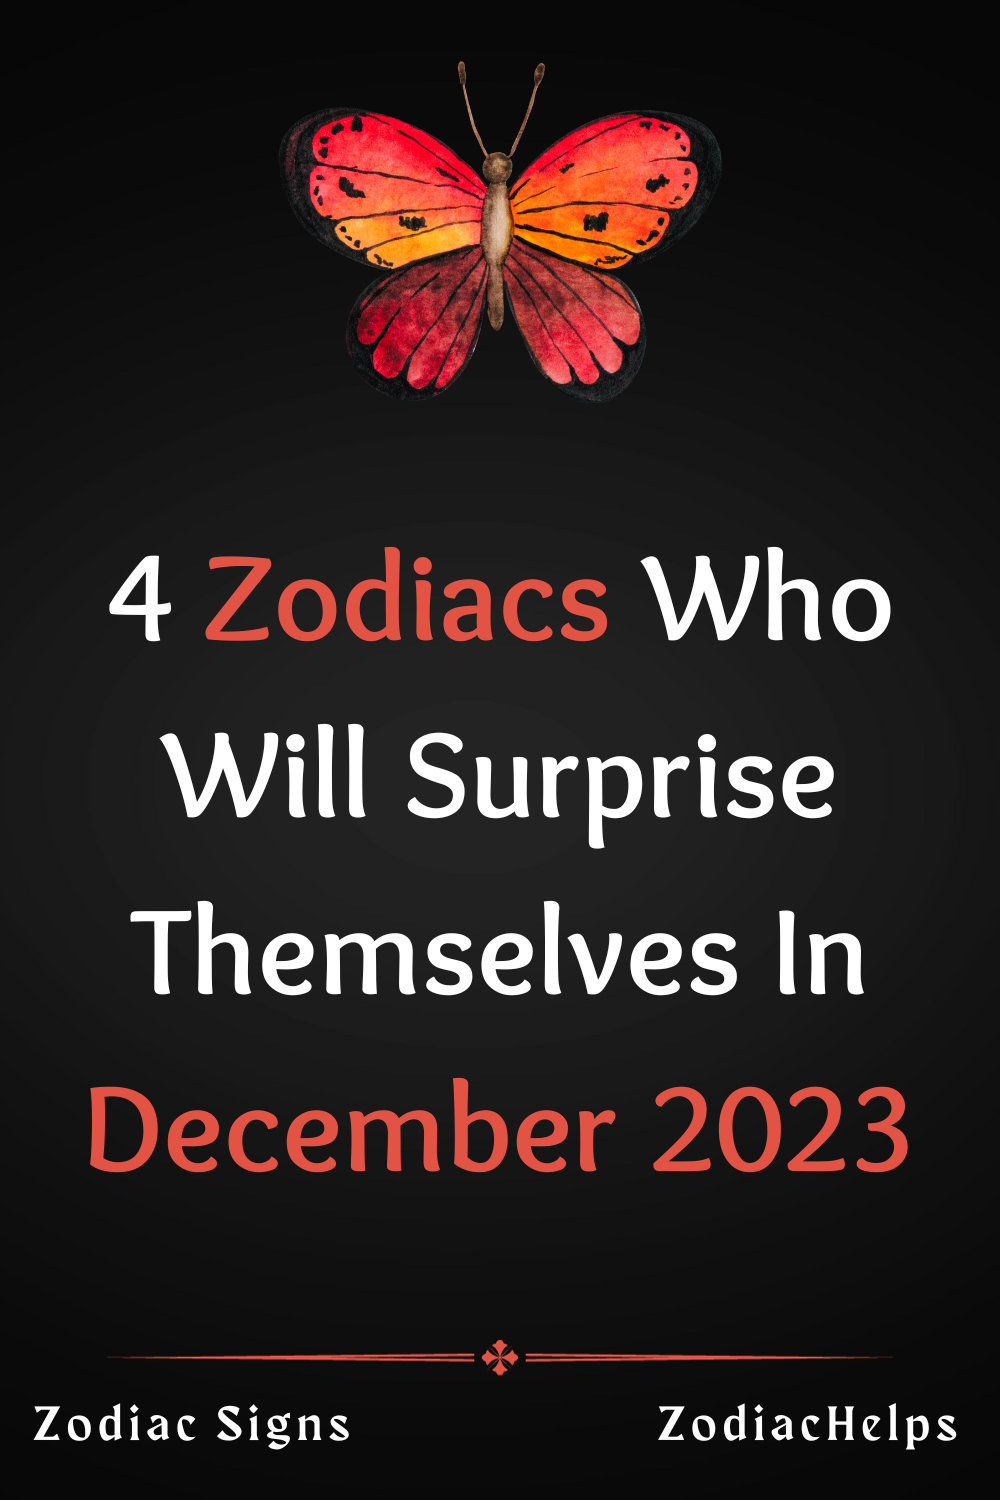 4 Zodiacs Who Will Surprise Themselves In December 2023